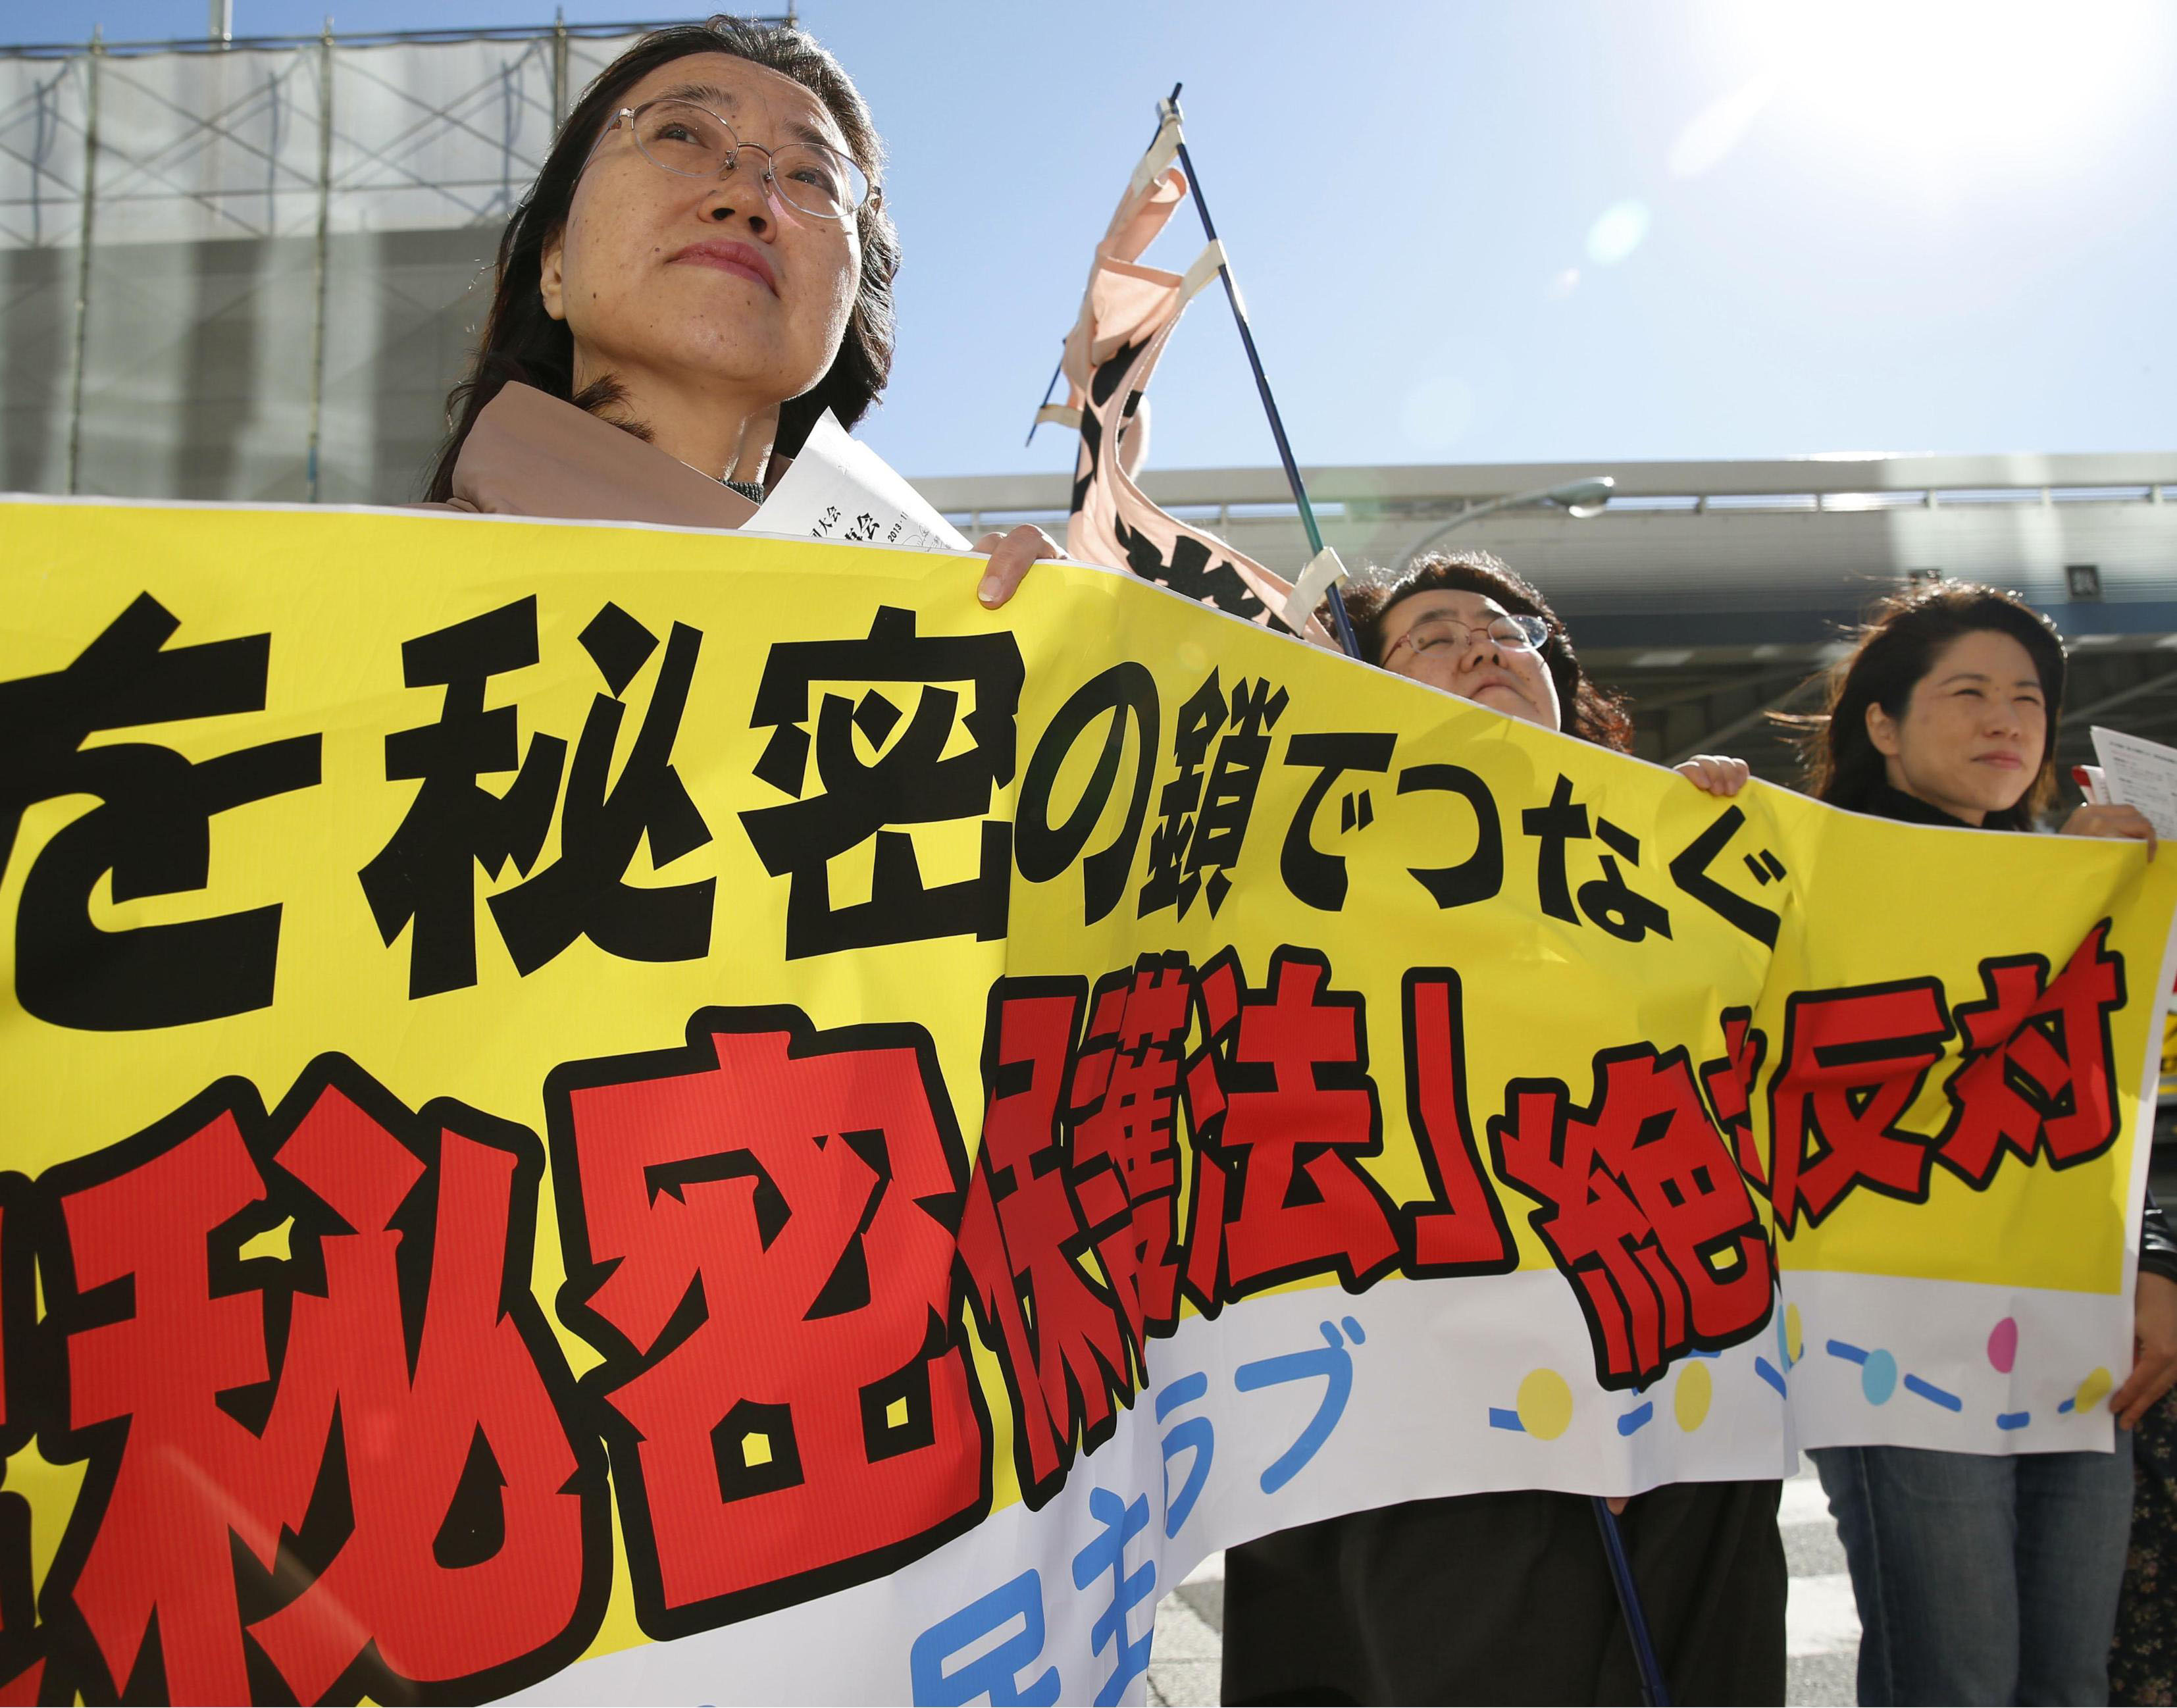 Spelling it out: People opposed to the state secrets bill hold a protest banner at a rally in Tokyo's Yurakucho district Tuesday. | KYODO